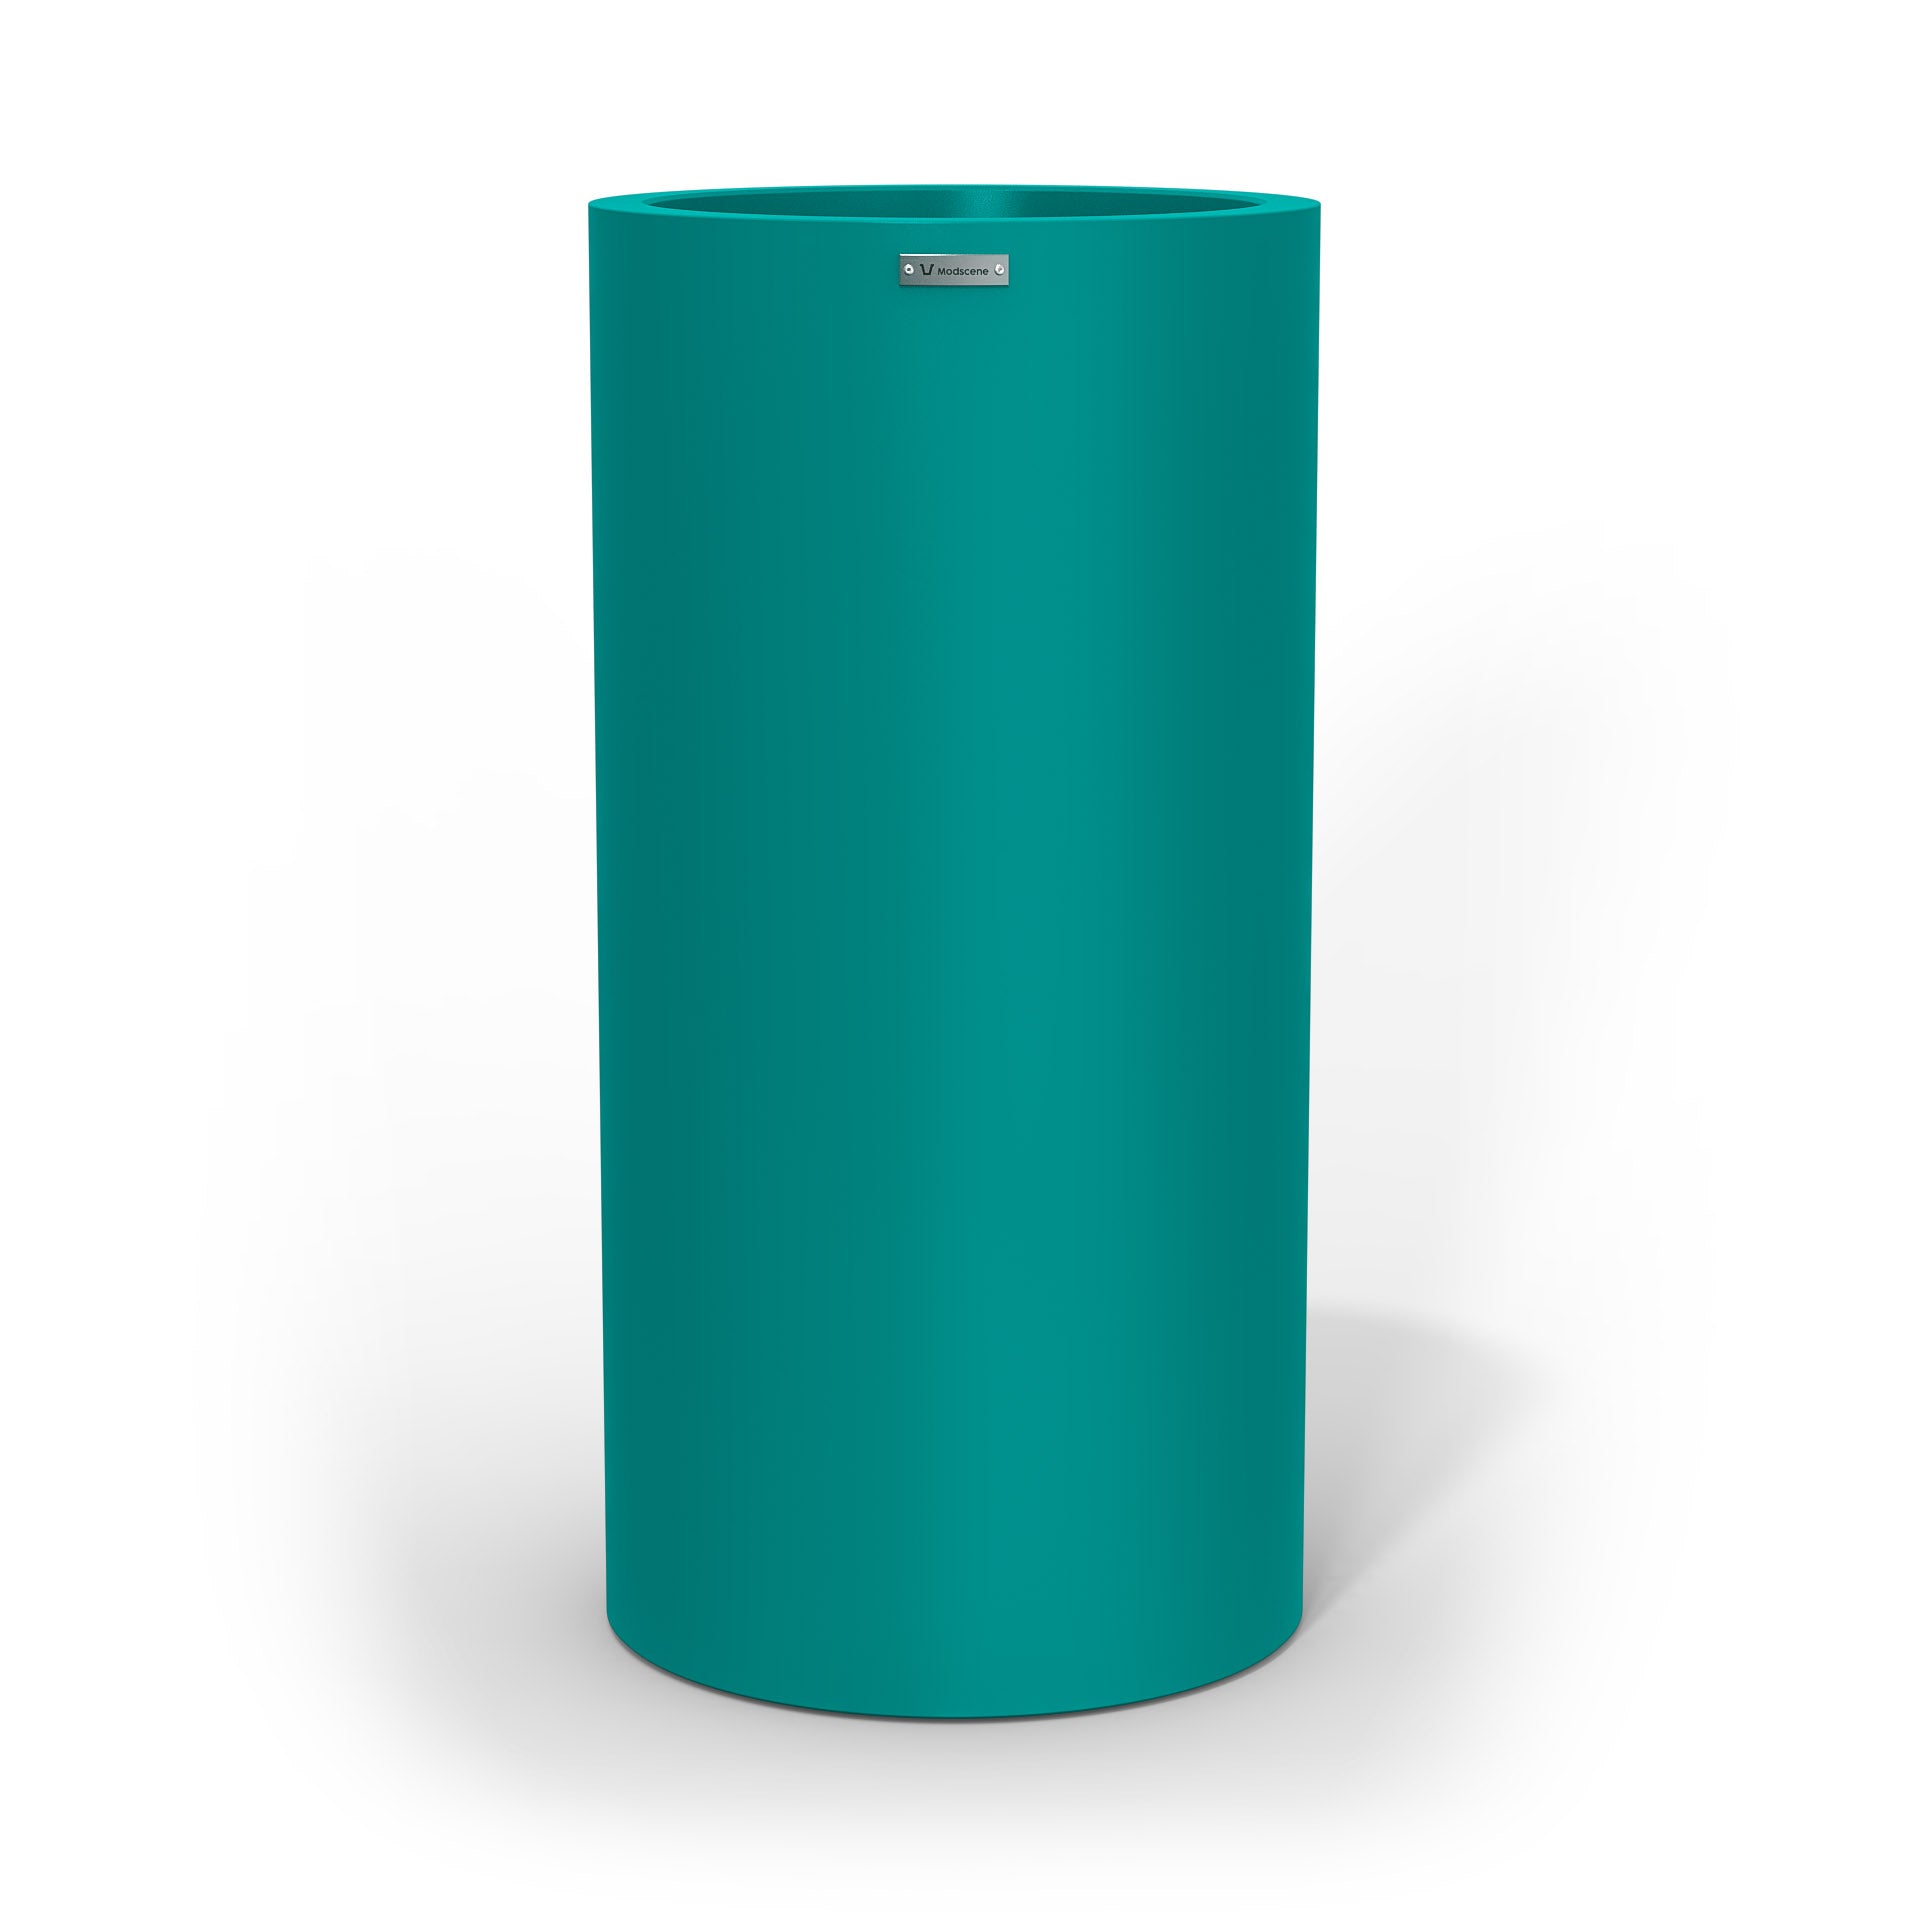 A tall cylinder planter pot in a teal colour made by Modscene NZ.